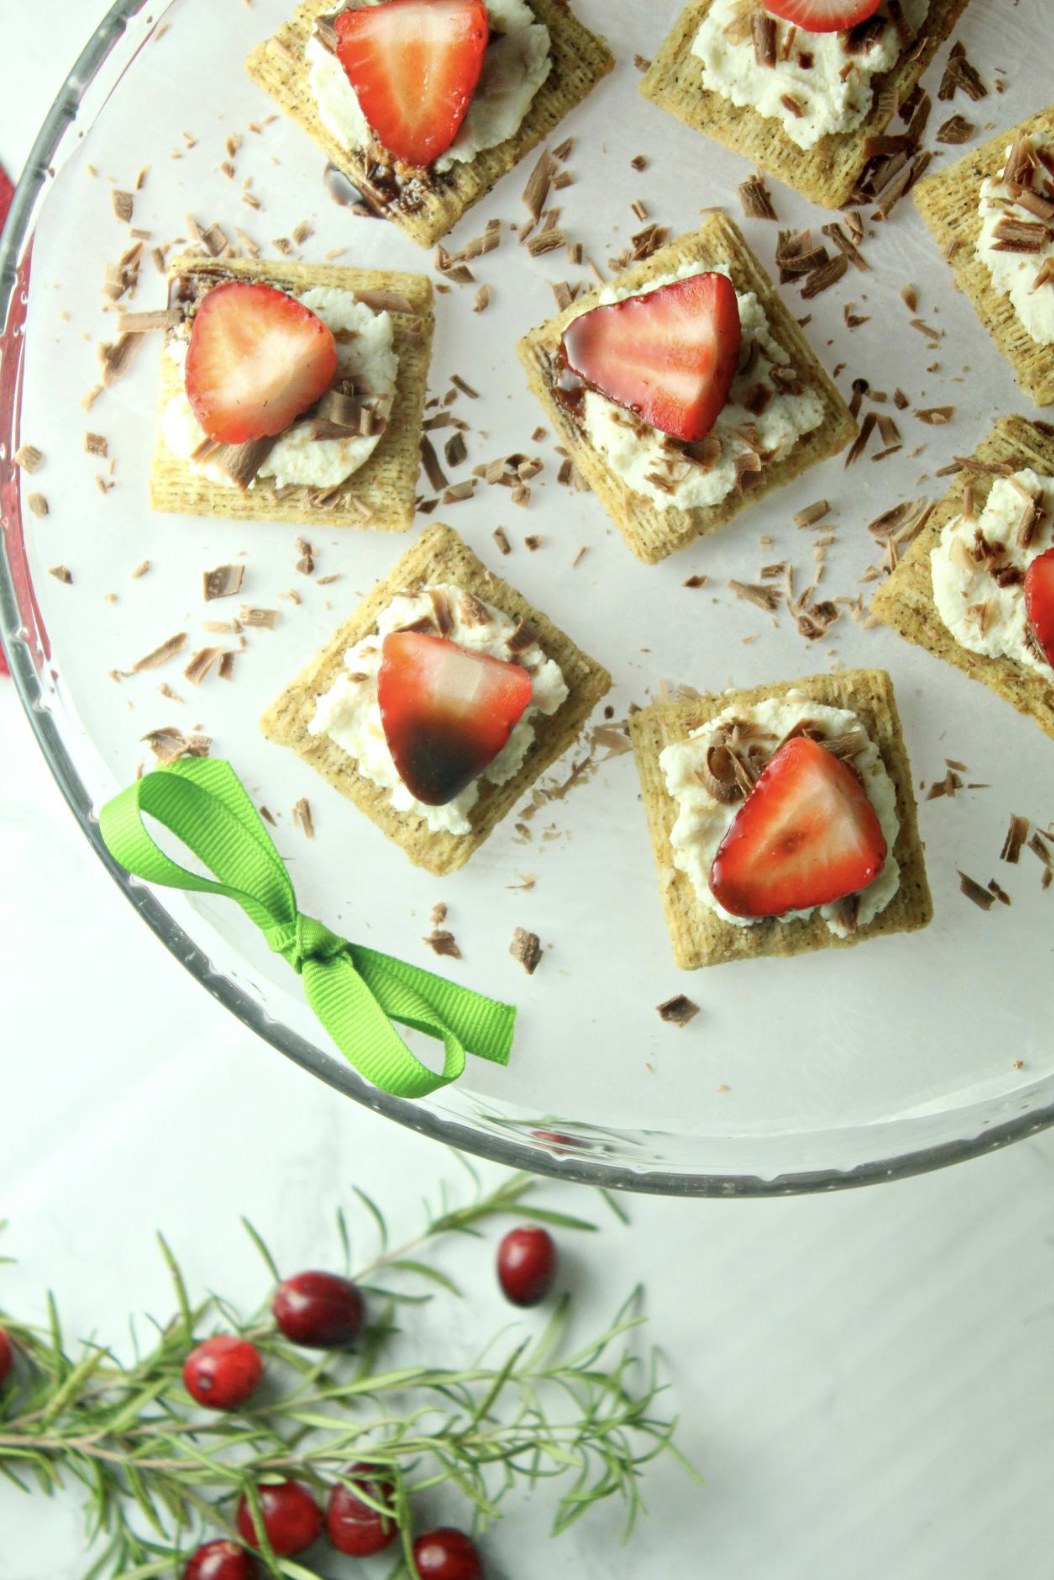 Need a quick party appetizer or snack that's perfect for your next holiday party? Try my recipe for Triscuit Cheese and Chocolate-Dipped Strawberries! #HolidaysWithTriscuit #IC #AD